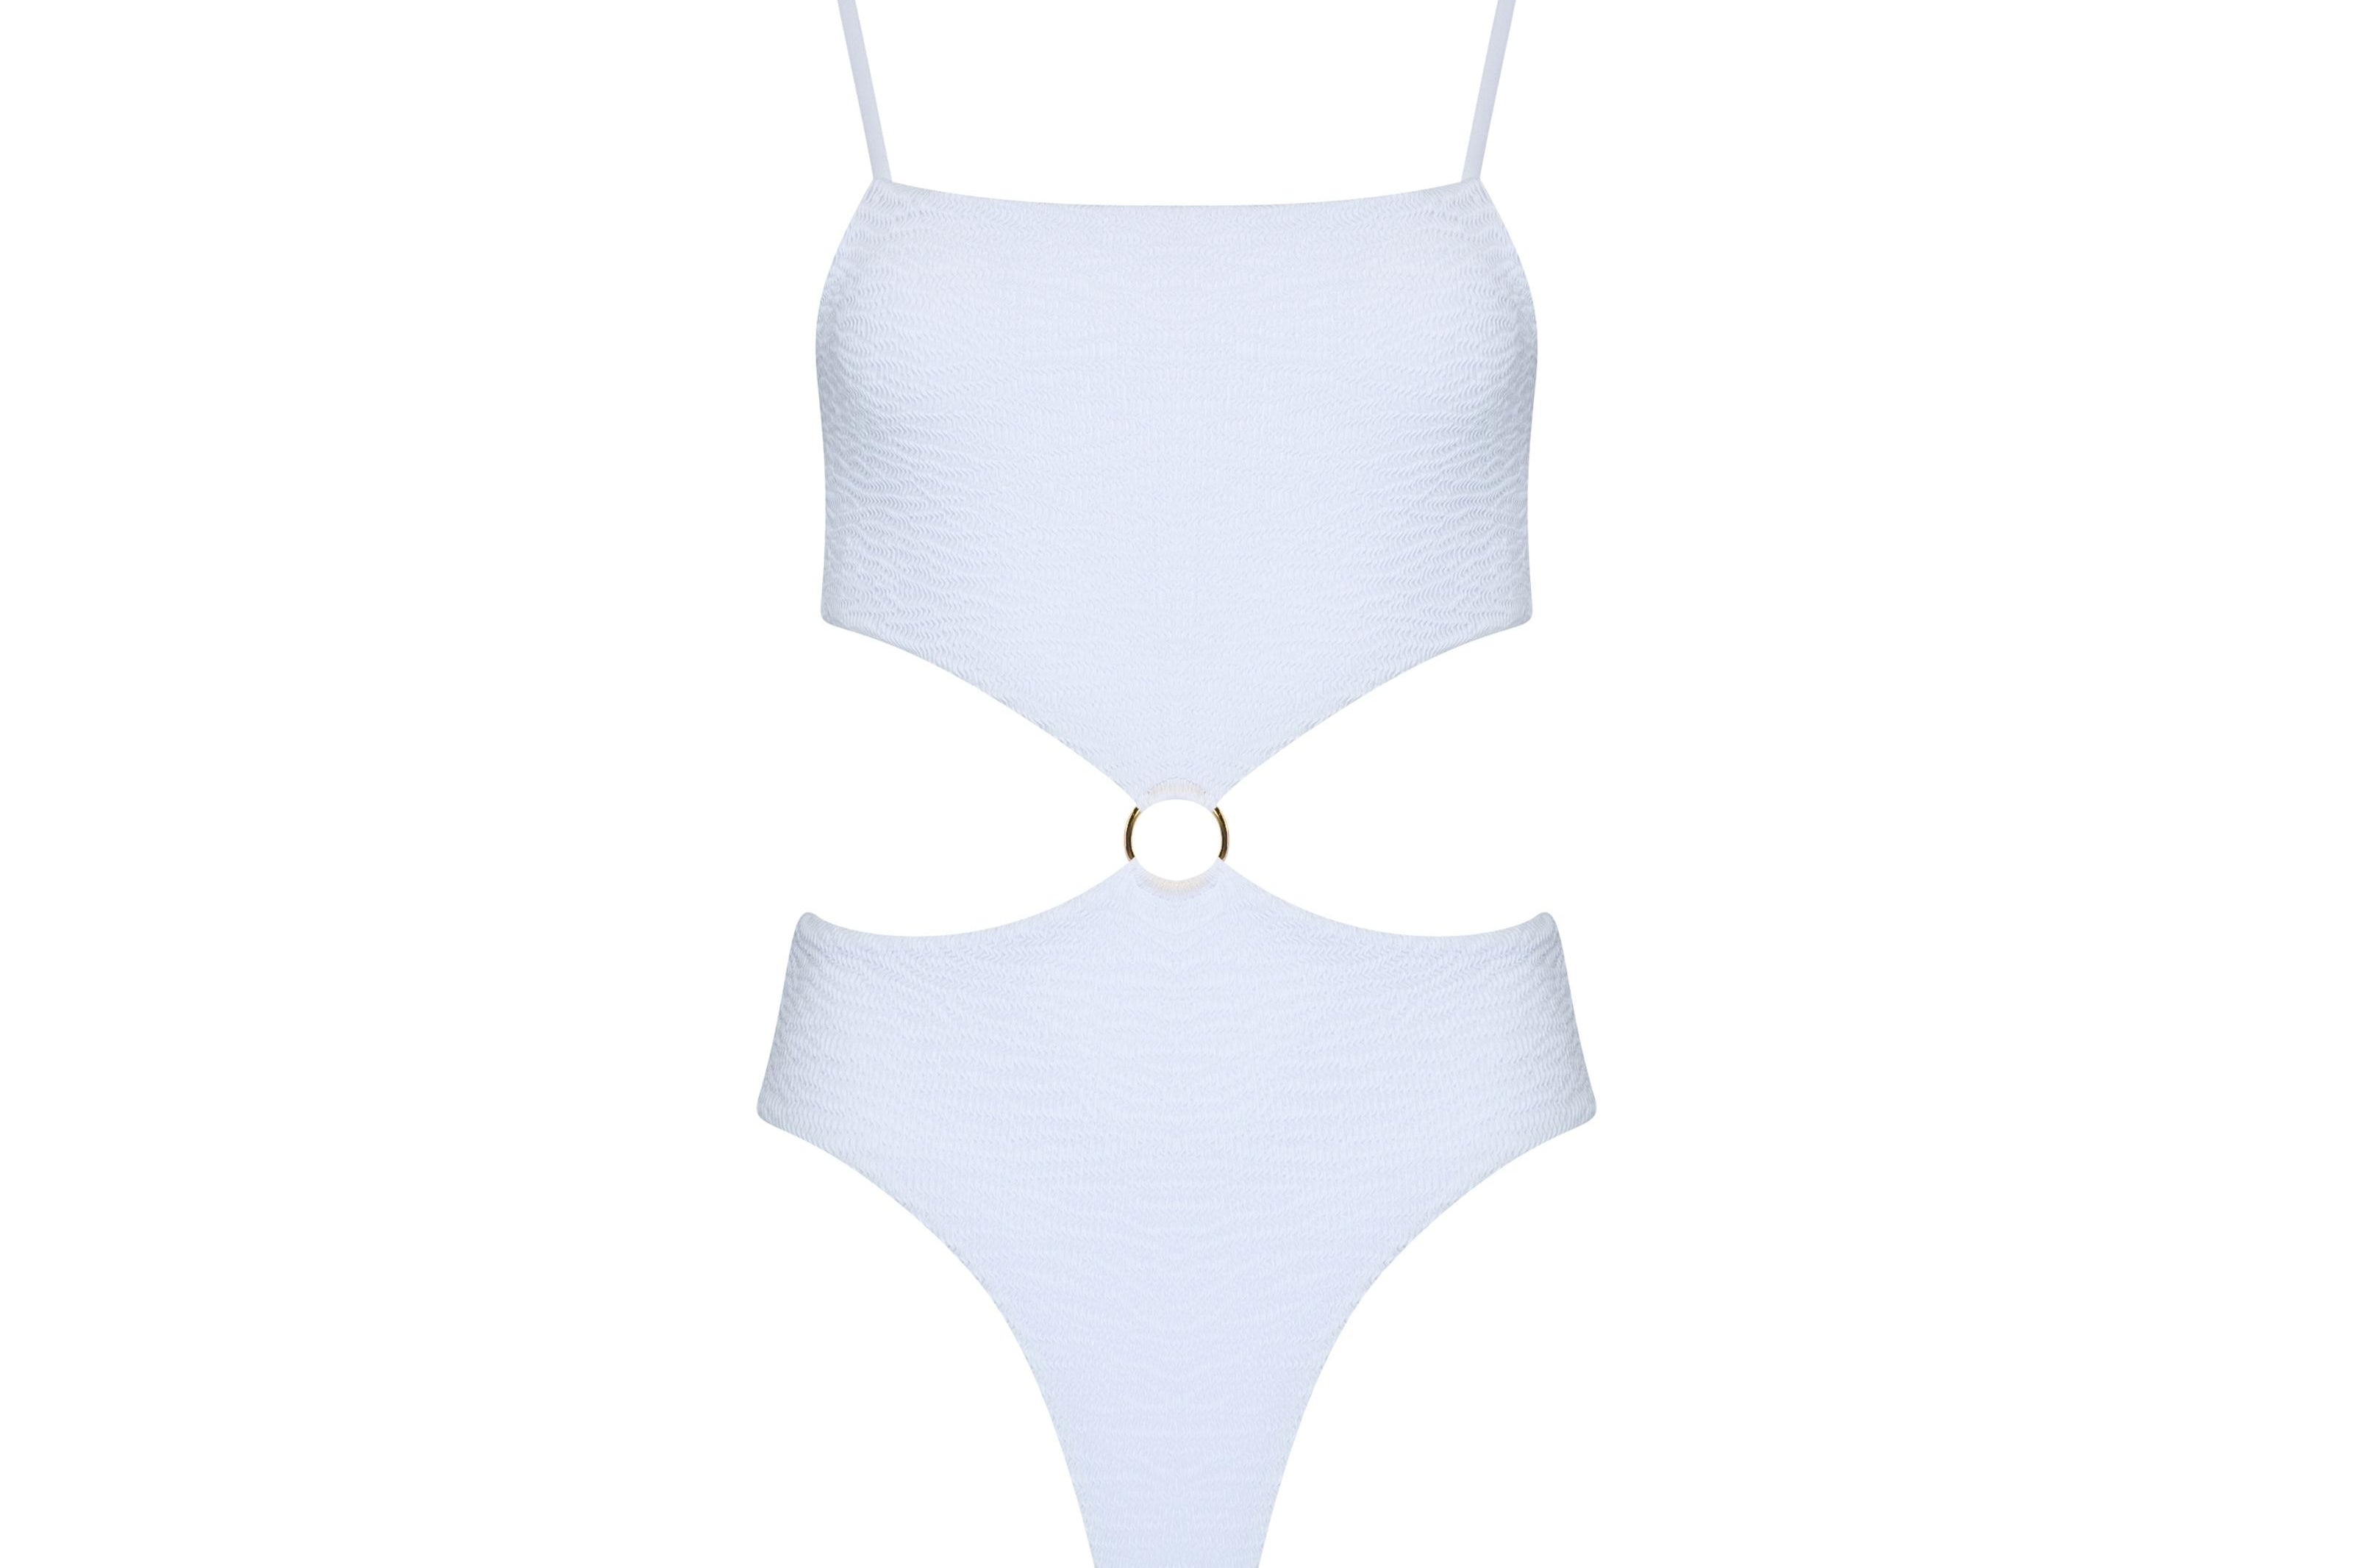 Shine bright in our Athena. Elegant and comfortable, it's perfect for a day of sun, sand, and relaxation.